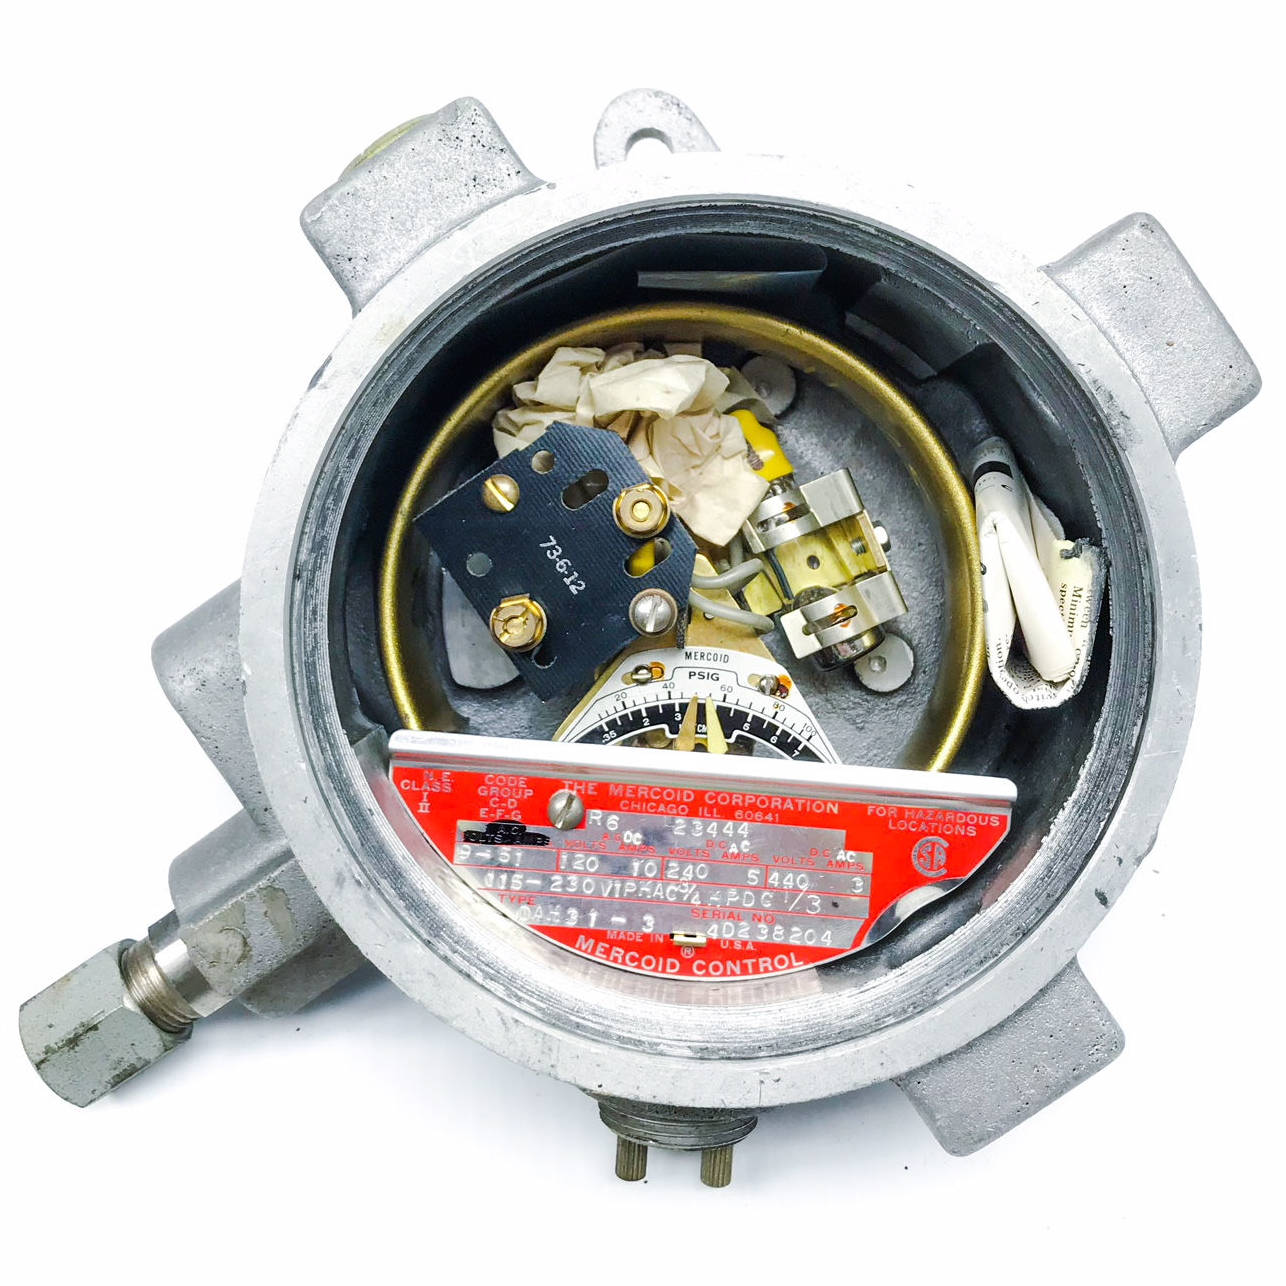 DAH31-3 Mercoid Control Pressure Switch Explosion Proof, Series D 3